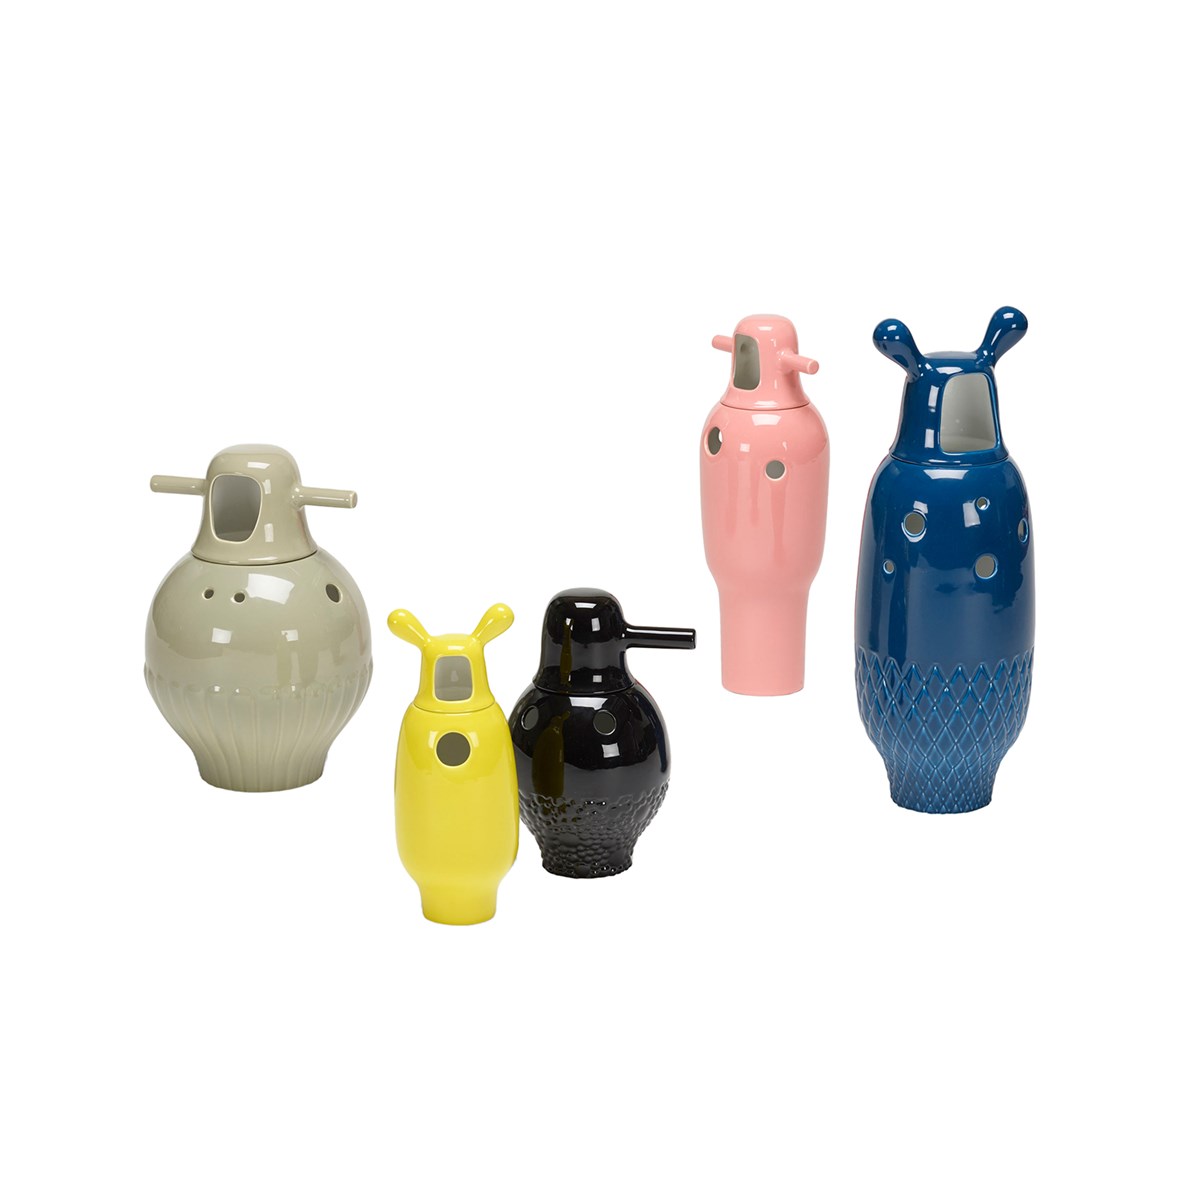 264 2 21 Art Design September 2020 Jaime Hayon Showtime Vases Collection Of Five Wright Auction